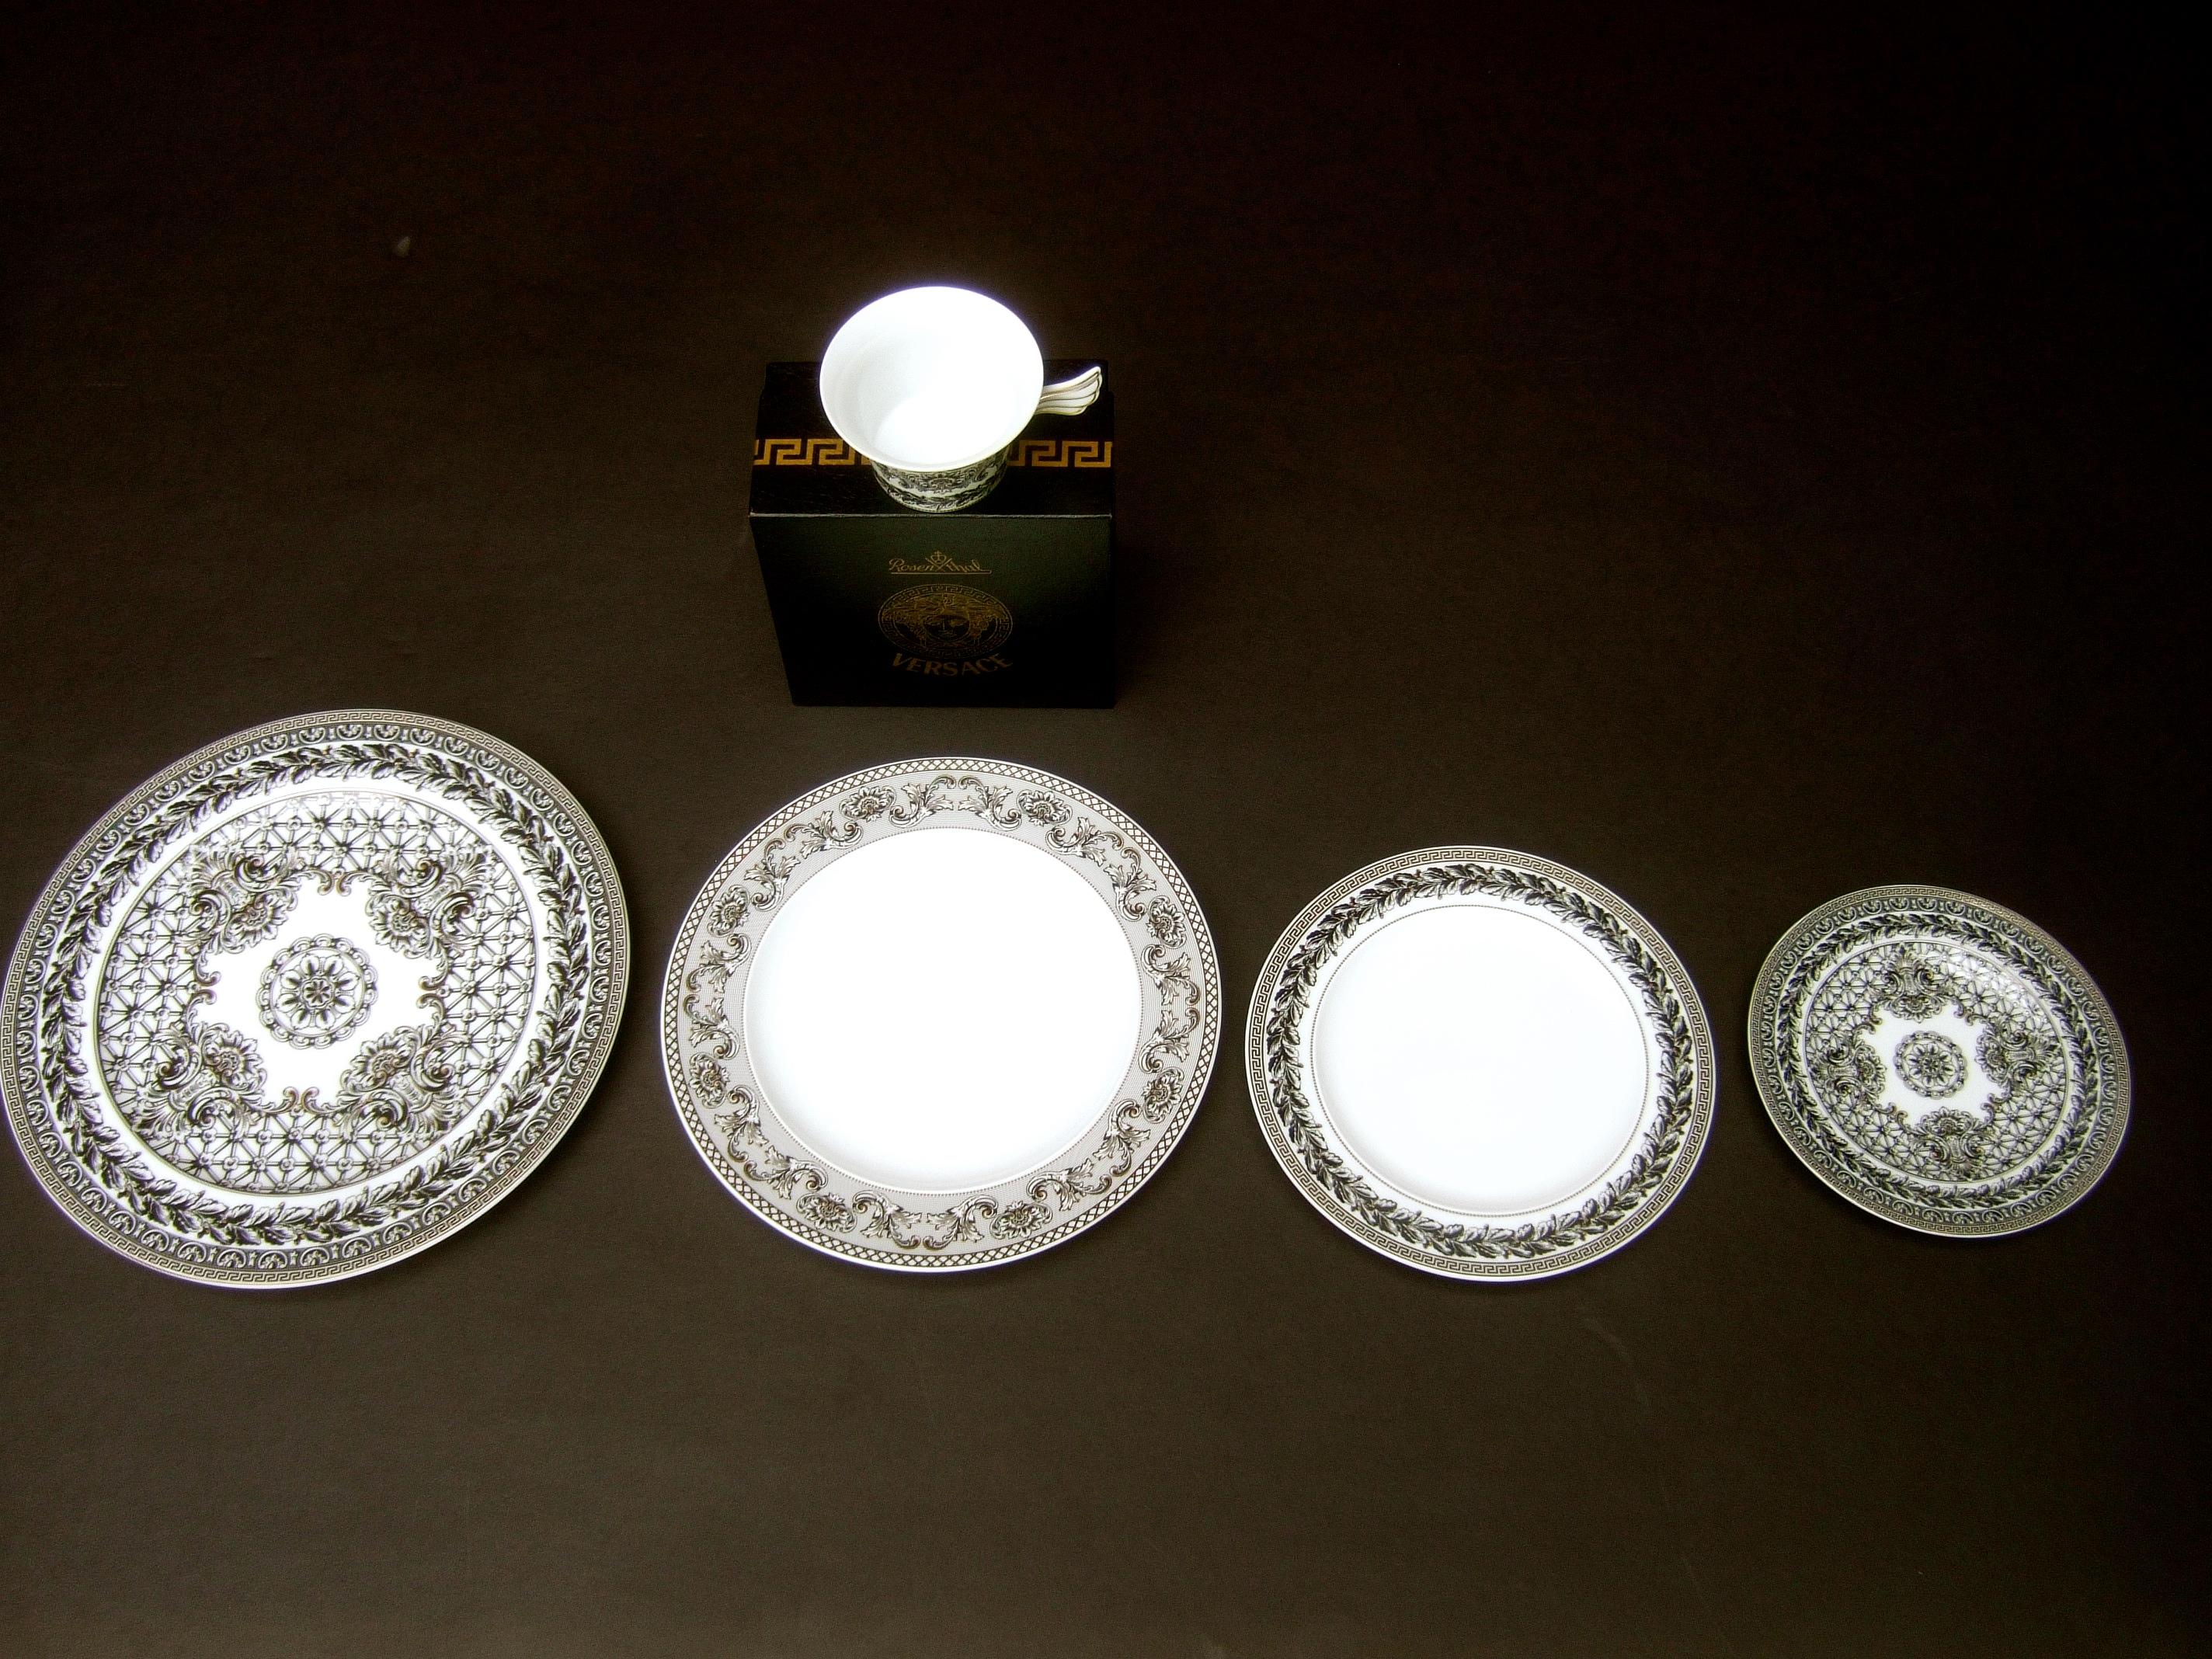 Gray Collection of Four Versace for Rosenthal Porcelain Dining Plates circa 1990s